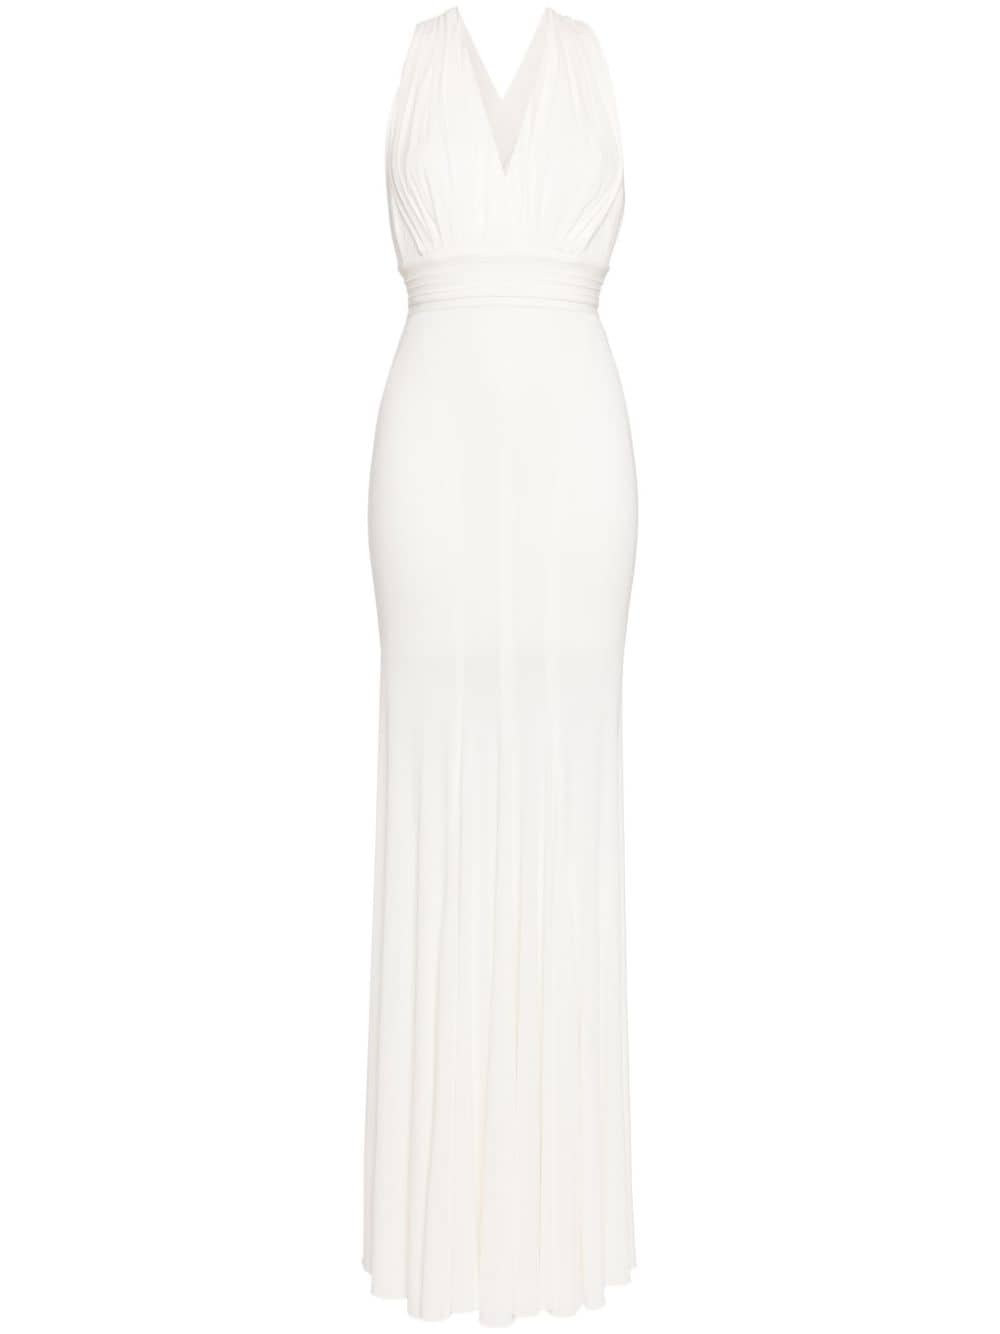 Herve L Leroux Pleated Fishtail Gown In White